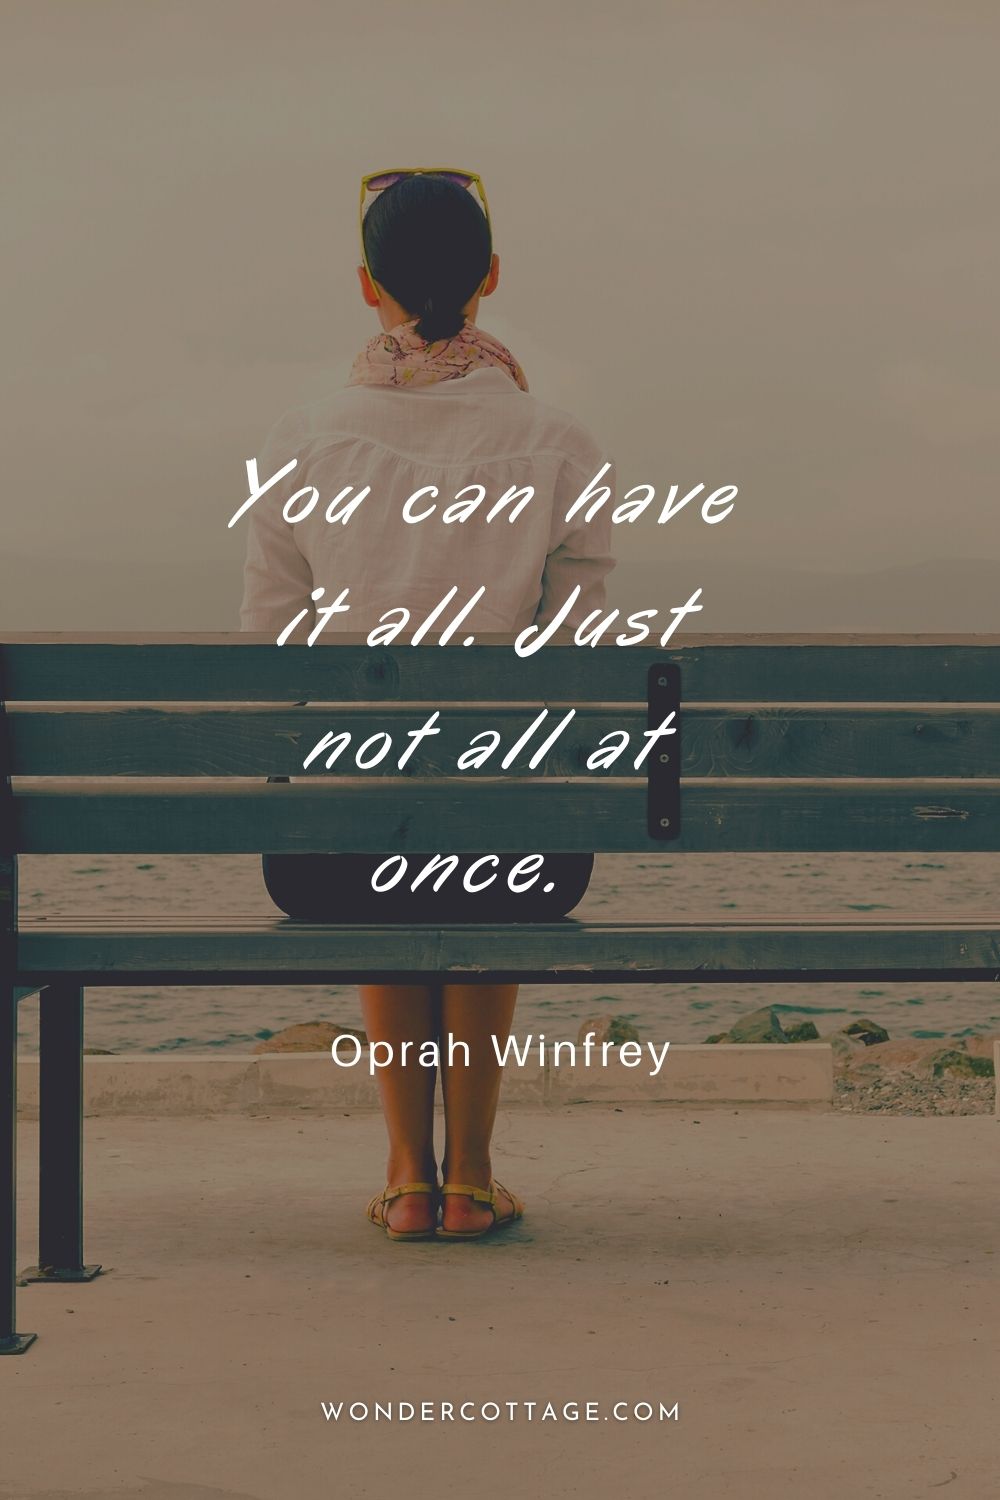 You can have it all. Just not all at once.  Oprah Winfrey